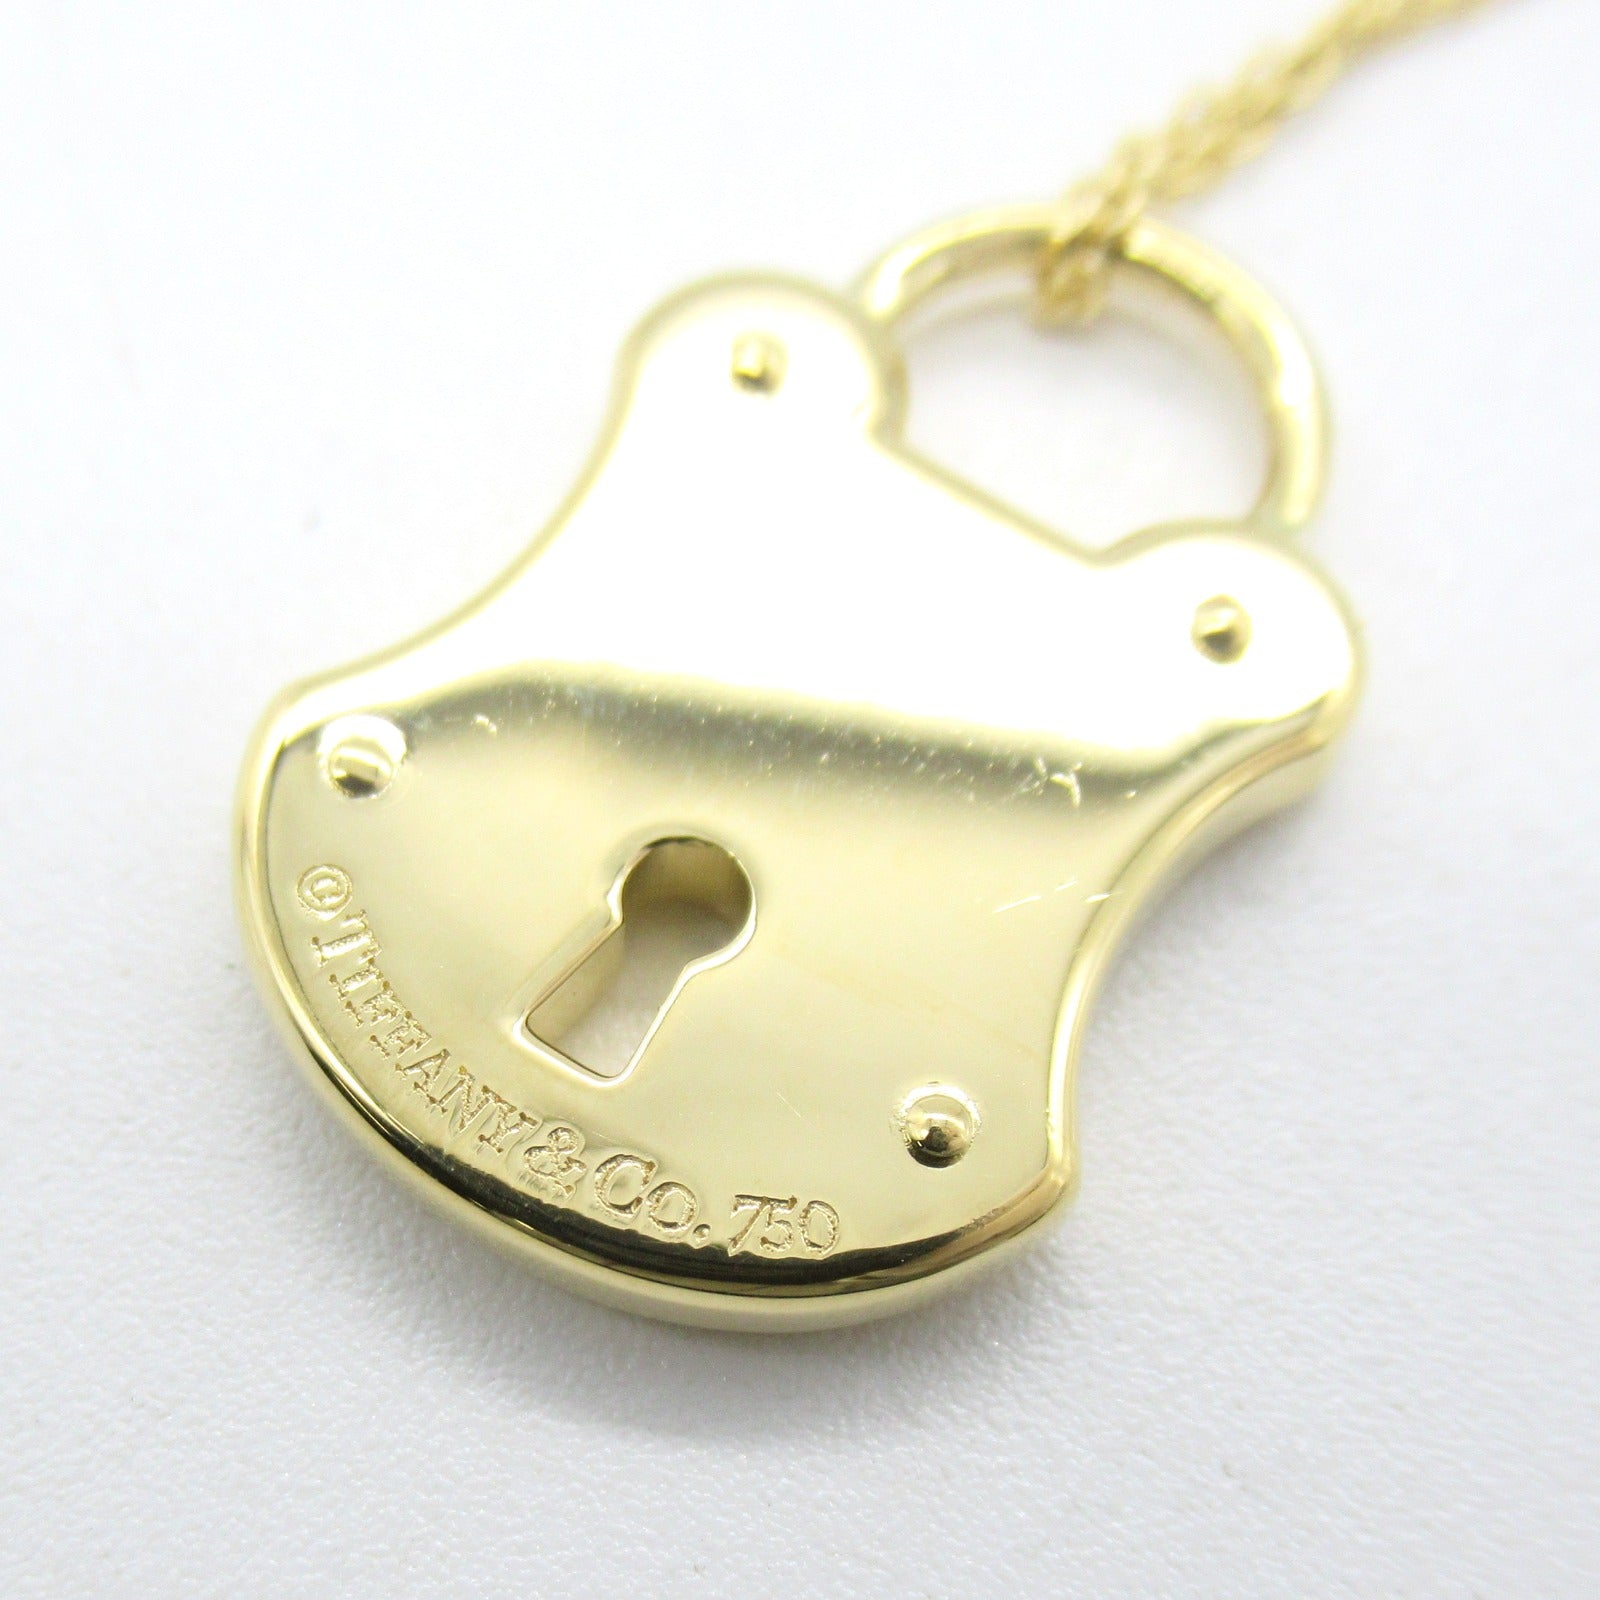 Tiffany&Co Lock Motif Necklaces K18 (Yellow G)  Gold Collars